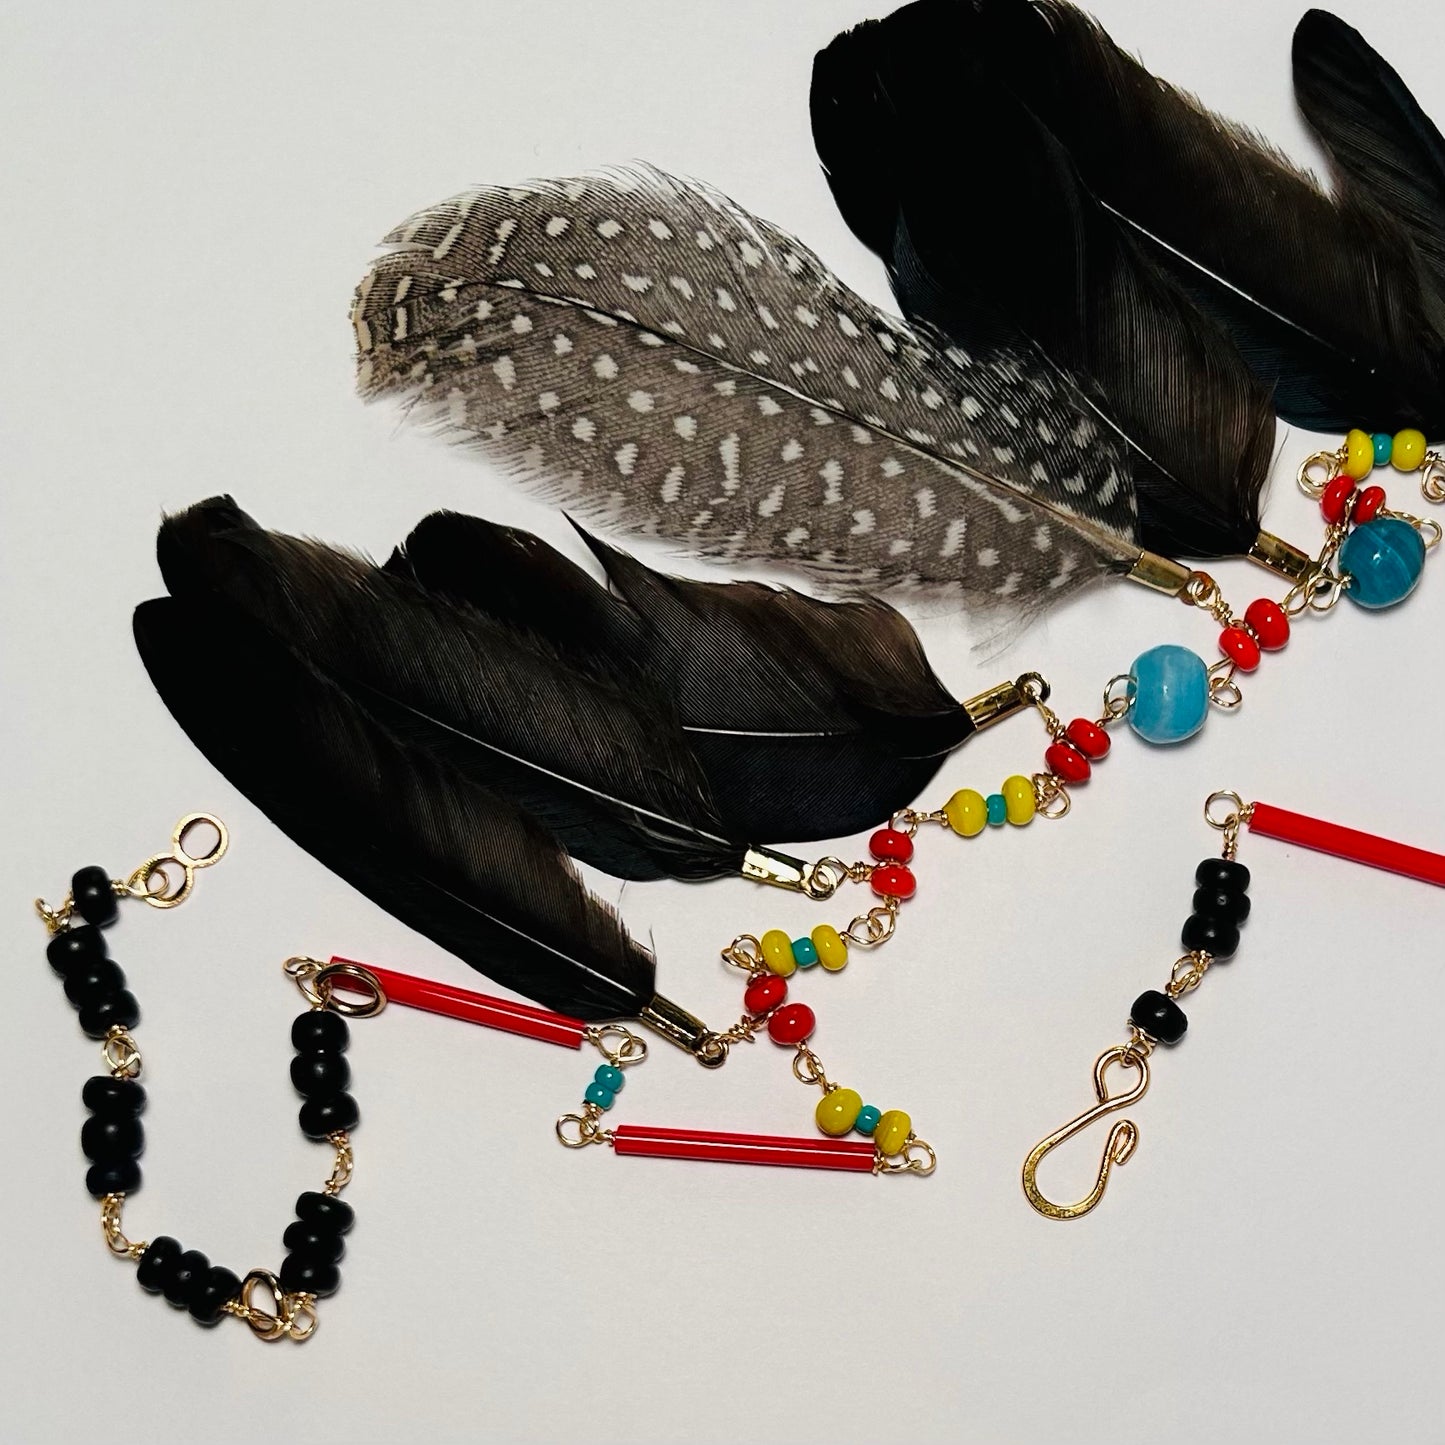 En Route, Feathered & Beaded Necklace